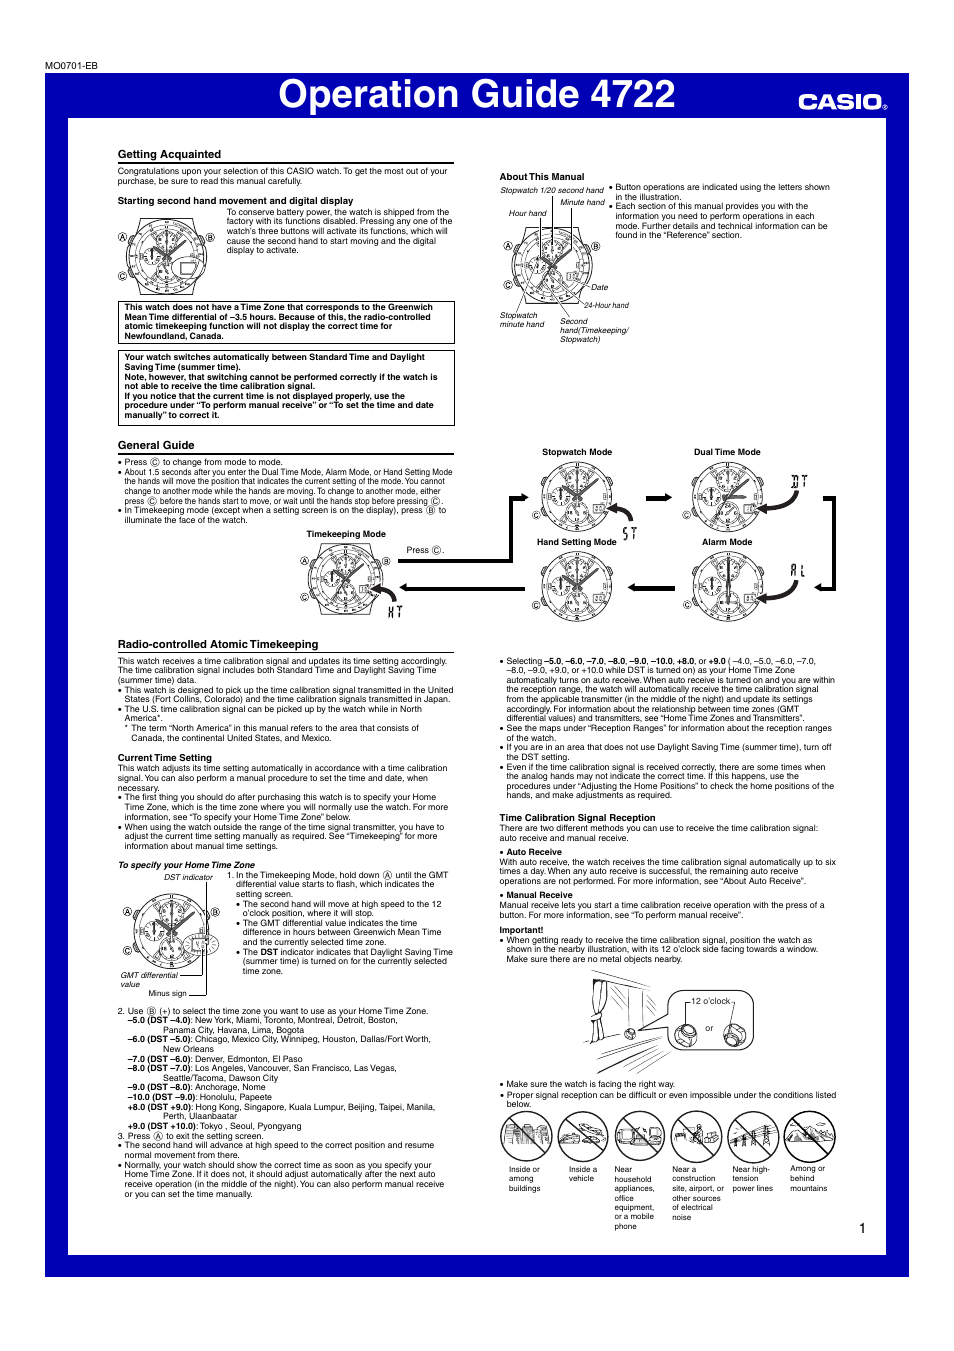 Casio Operation Guide 4722 User Manual | 4 pages